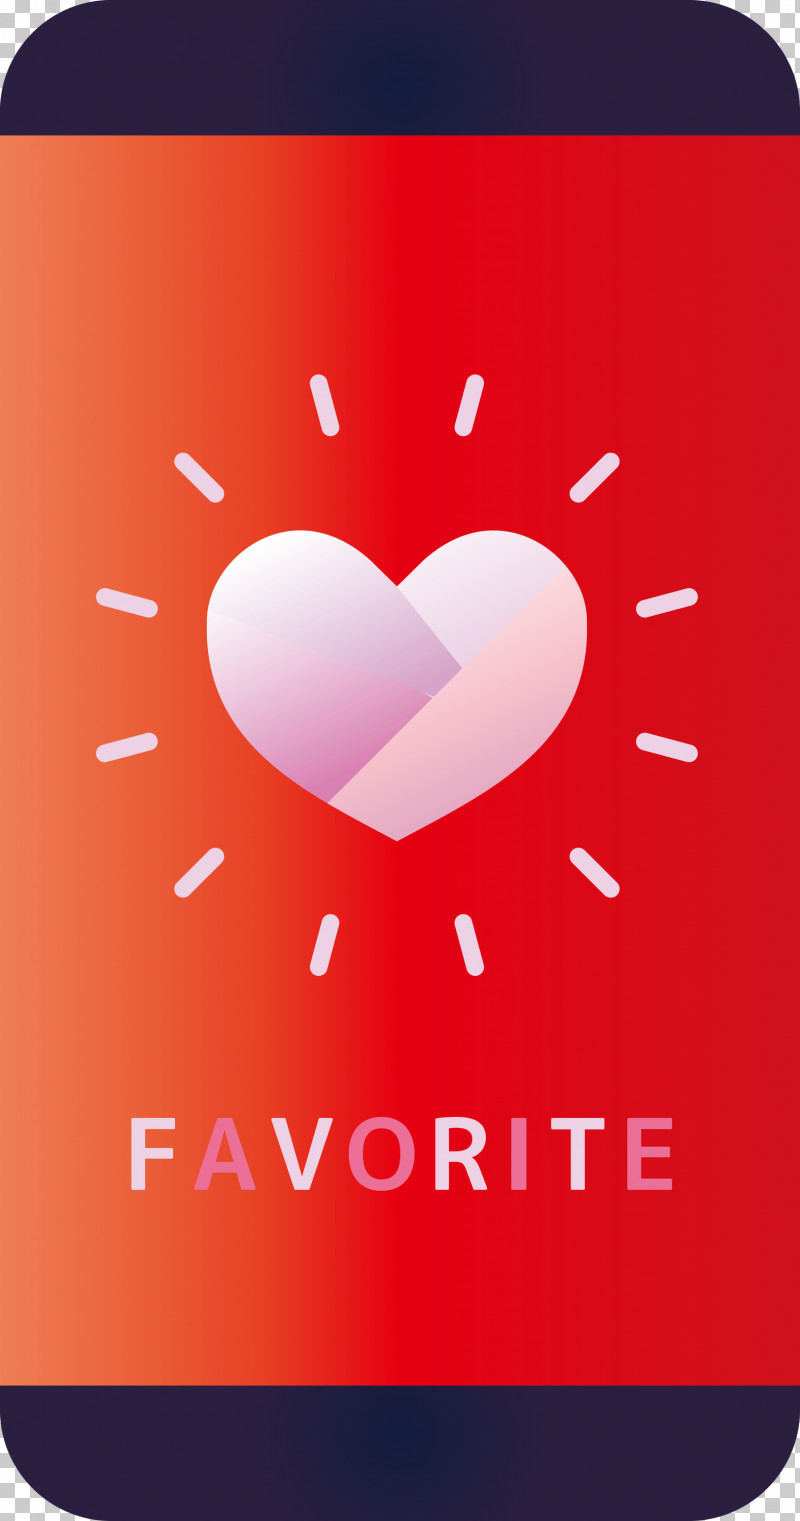 Darling Deary Favorite PNG, Clipart, Darling, Favorite, Favourite, Heart, Logo Free PNG Download